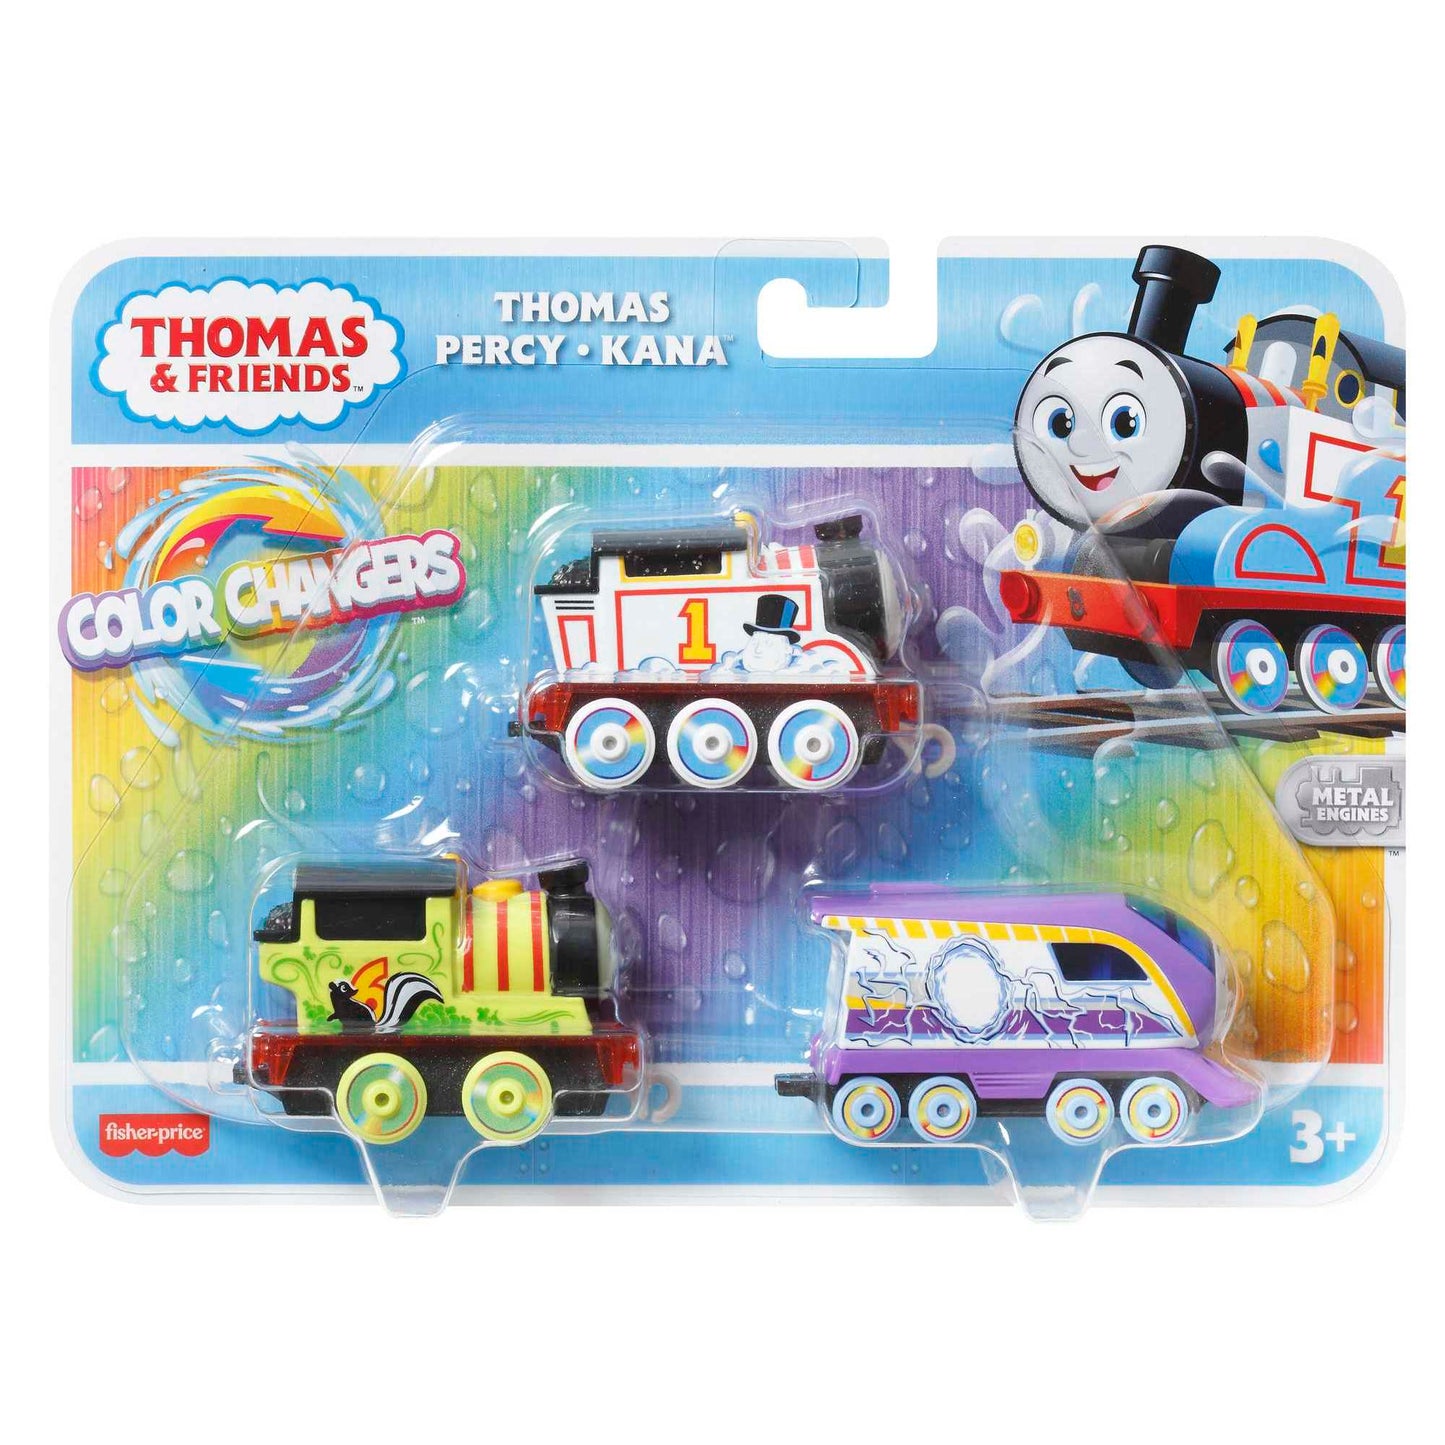 Fisher-Price Thomas & Friends Colour Changers Thomas, Percy, and Kana